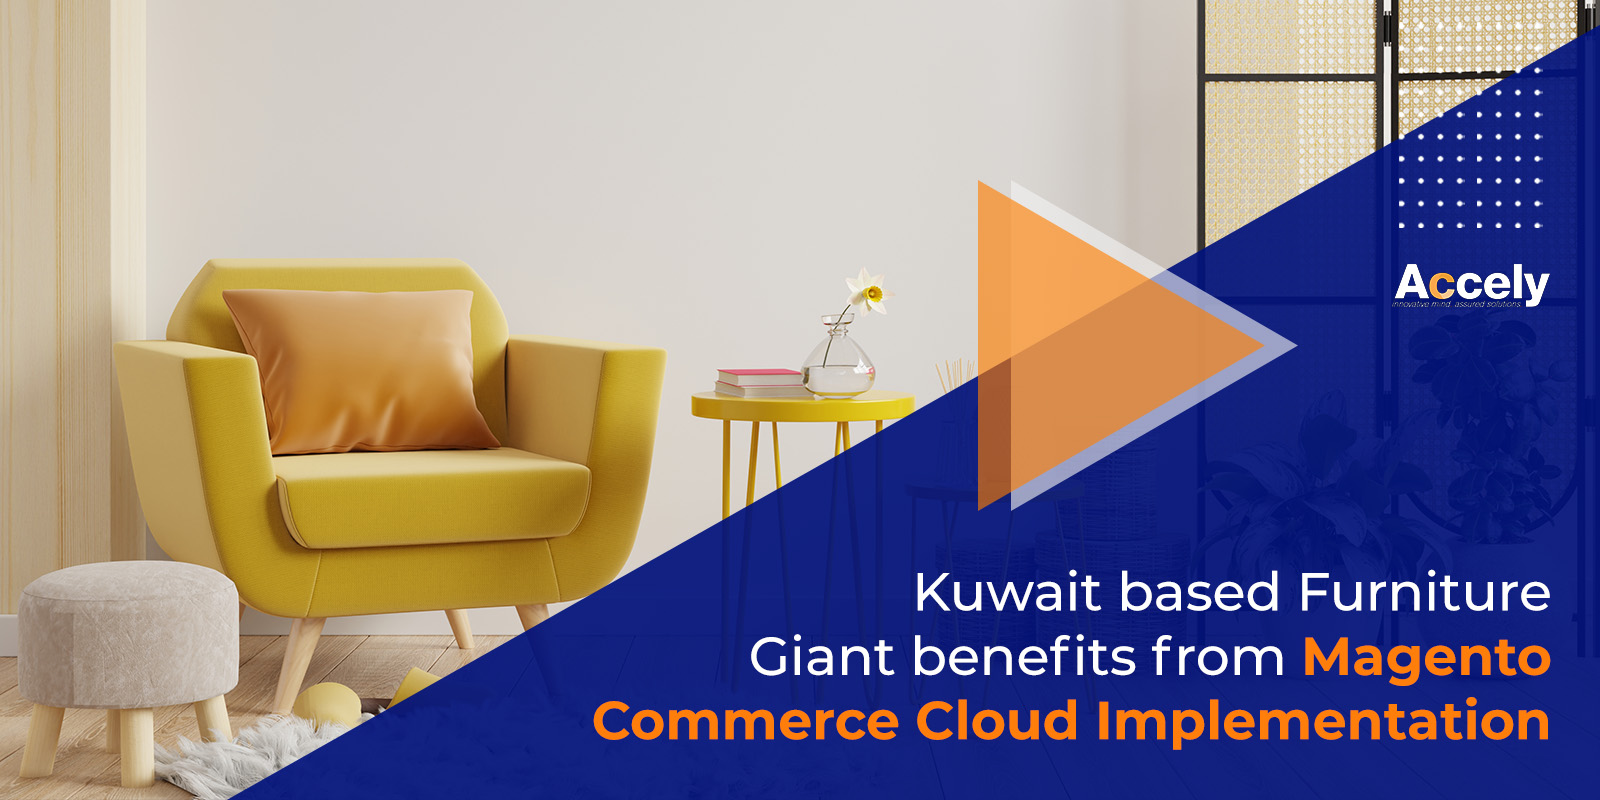 Kuwait based Furniture Giant benefits from Magento Commerce Cloud Implementation